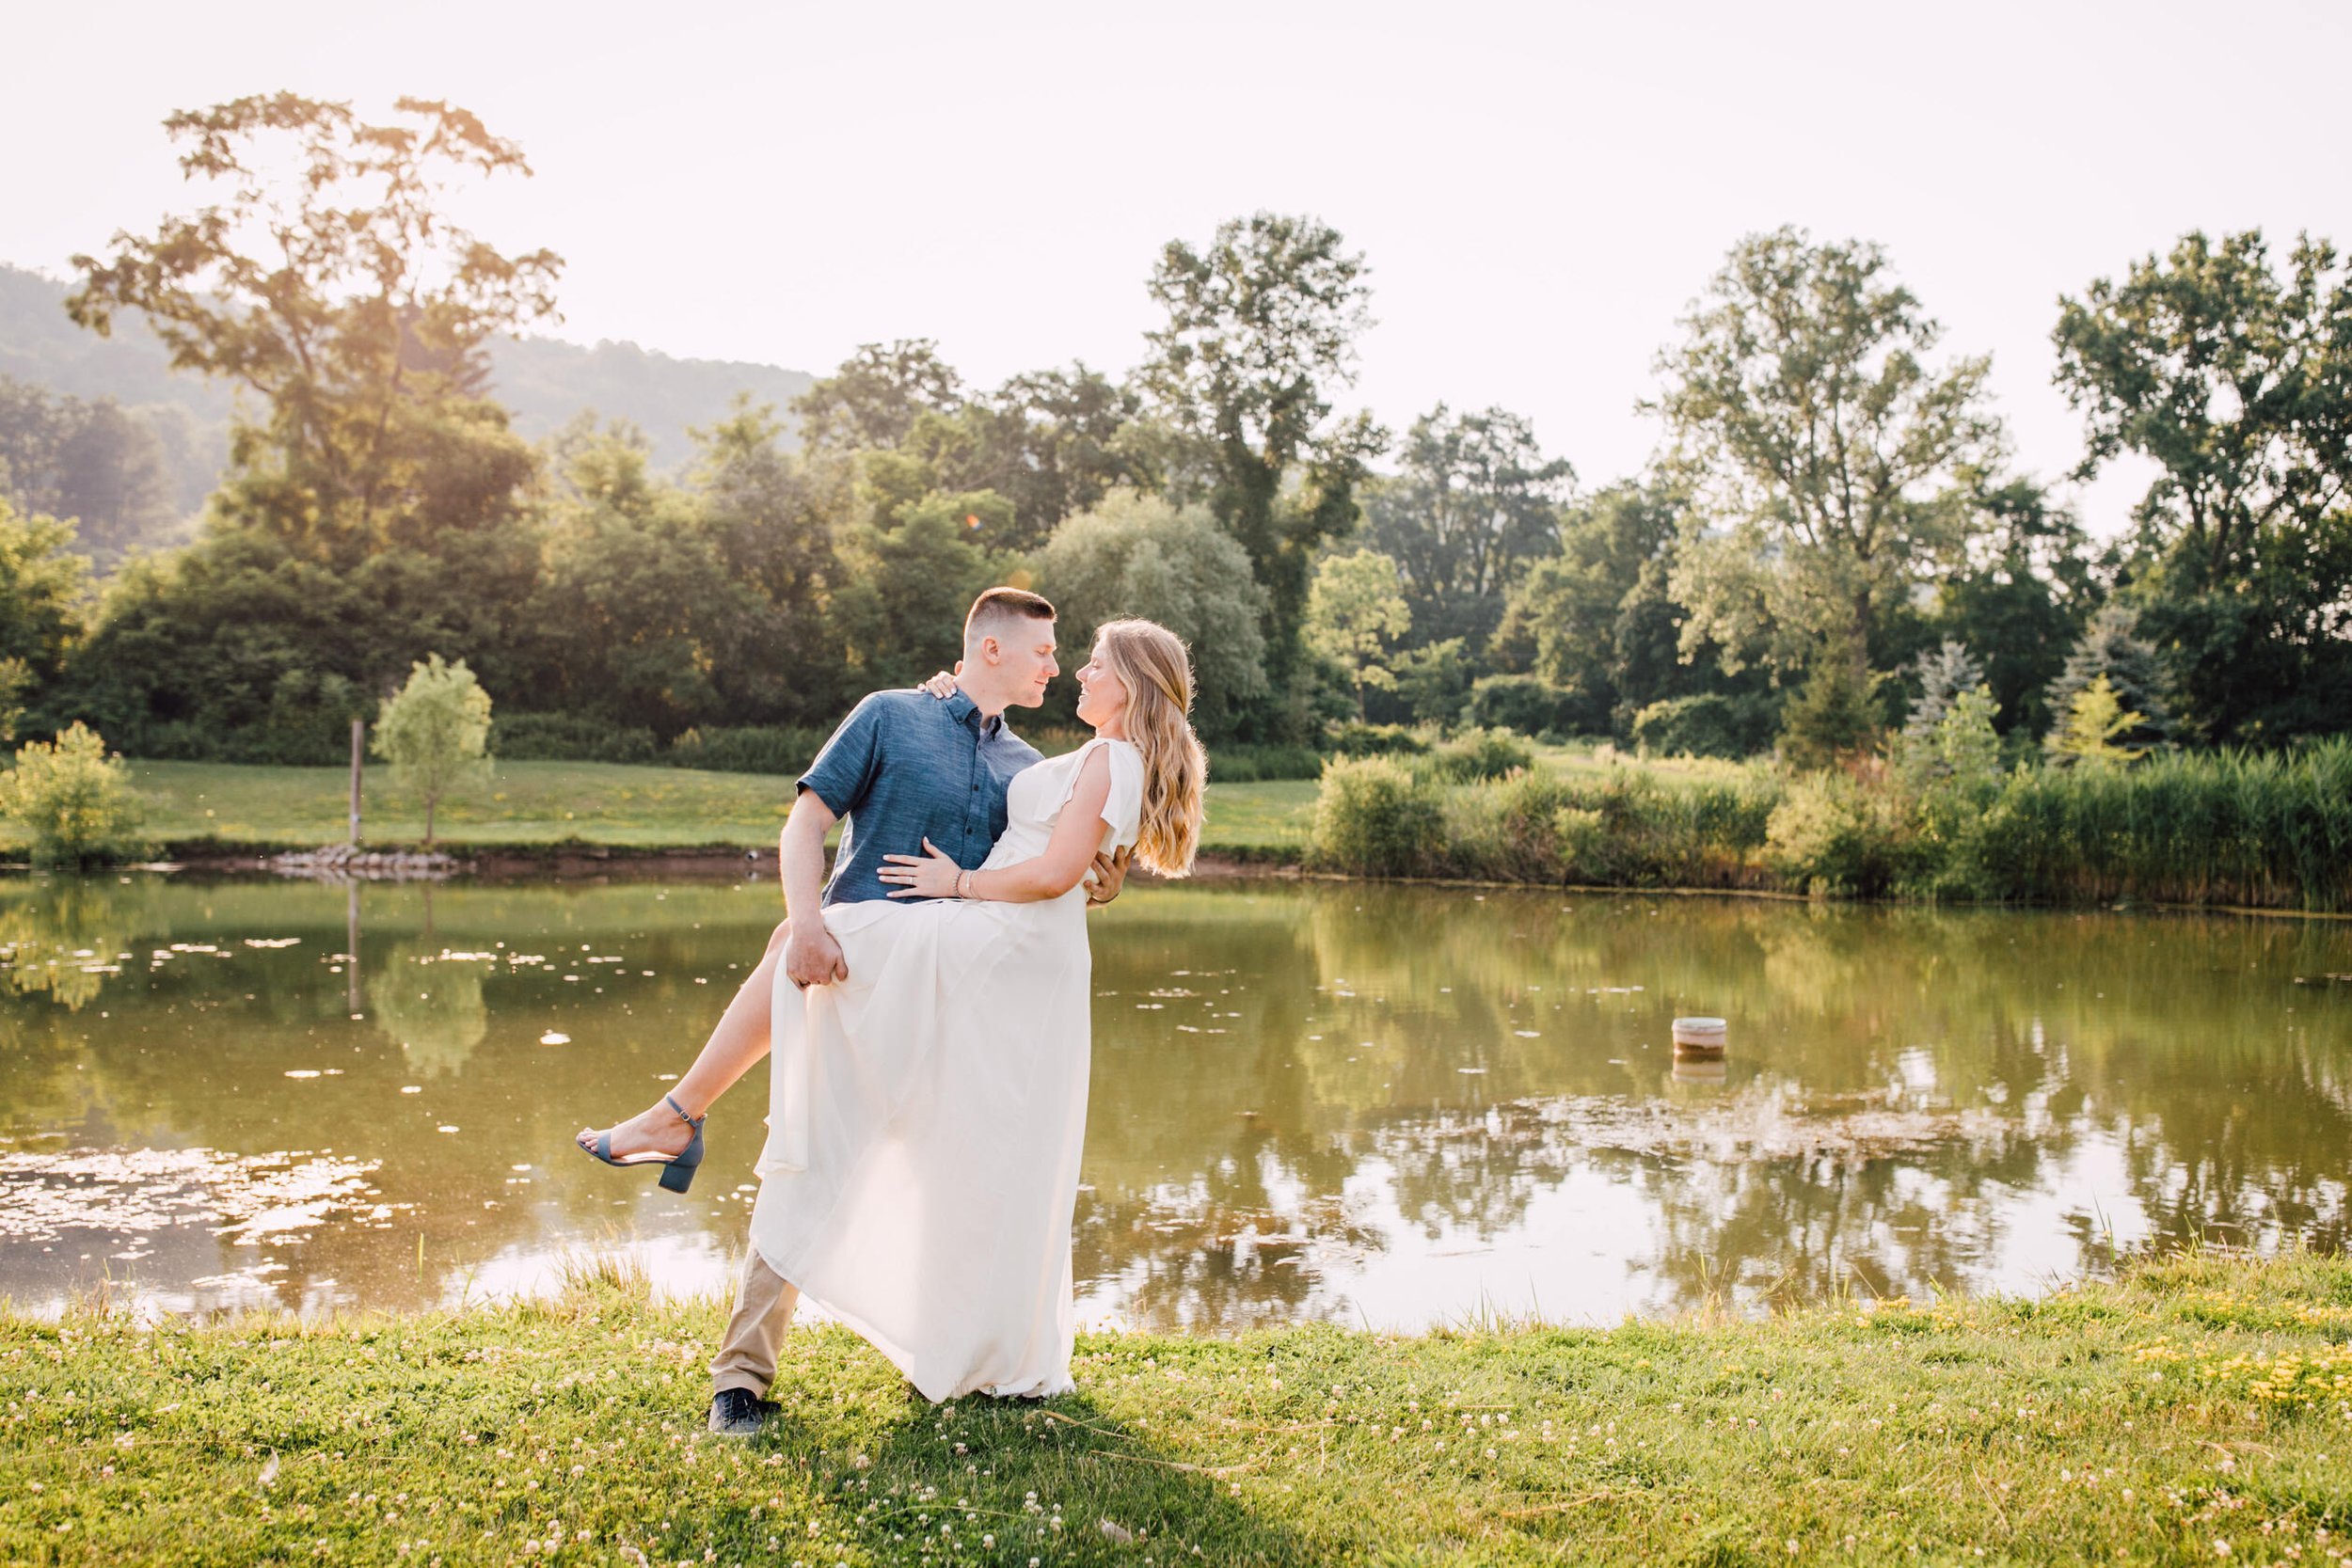  Jake leans his fiancé back while looking at her in front of the pond at rocking horse farm 